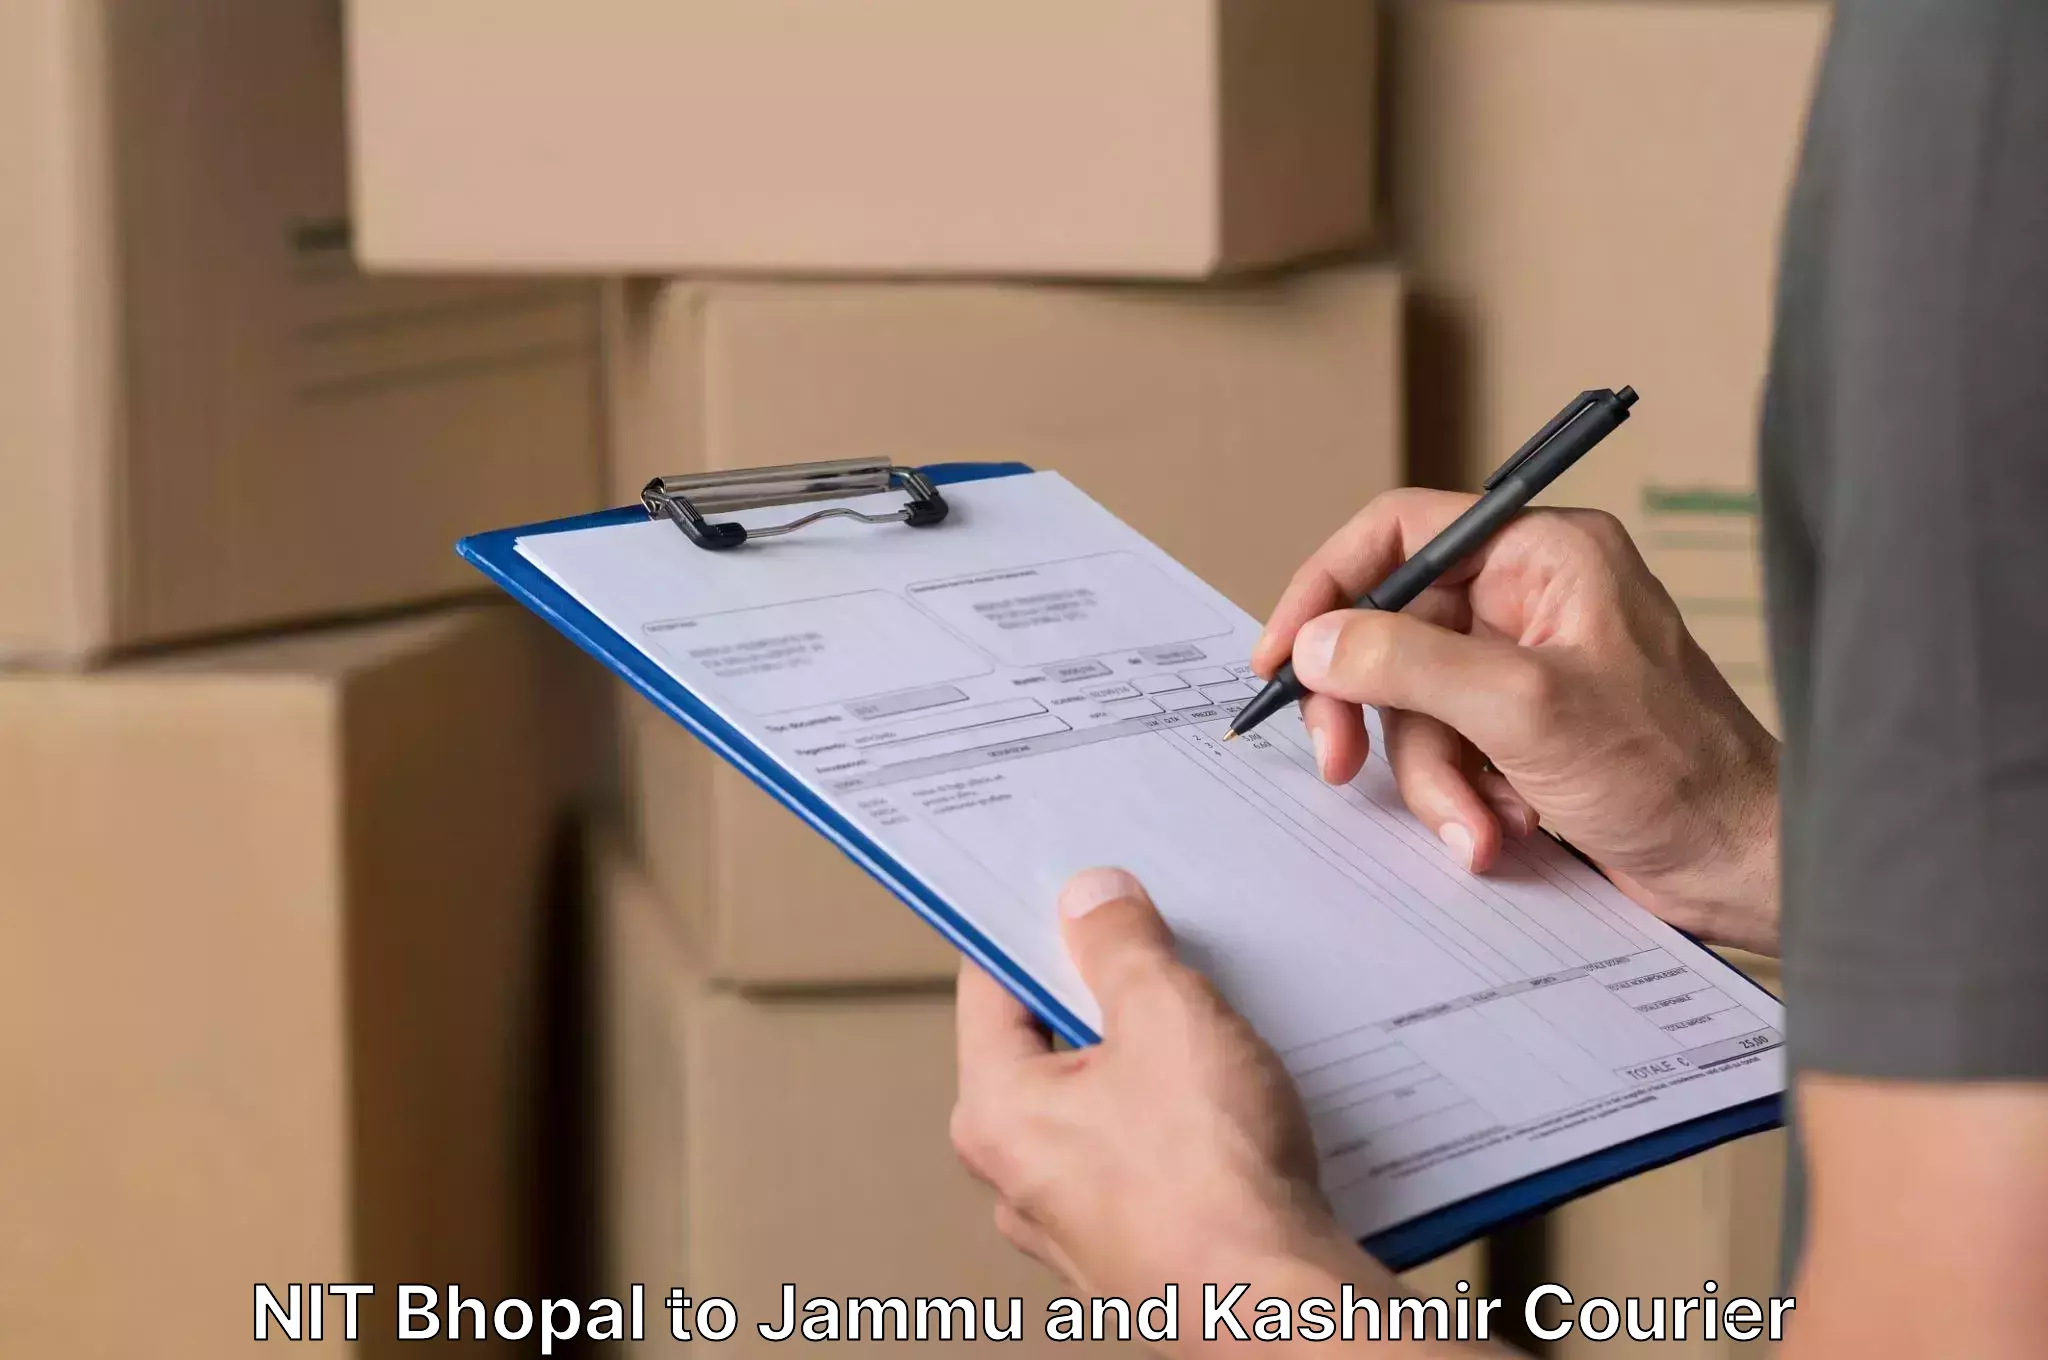 Home relocation experts NIT Bhopal to Budgam